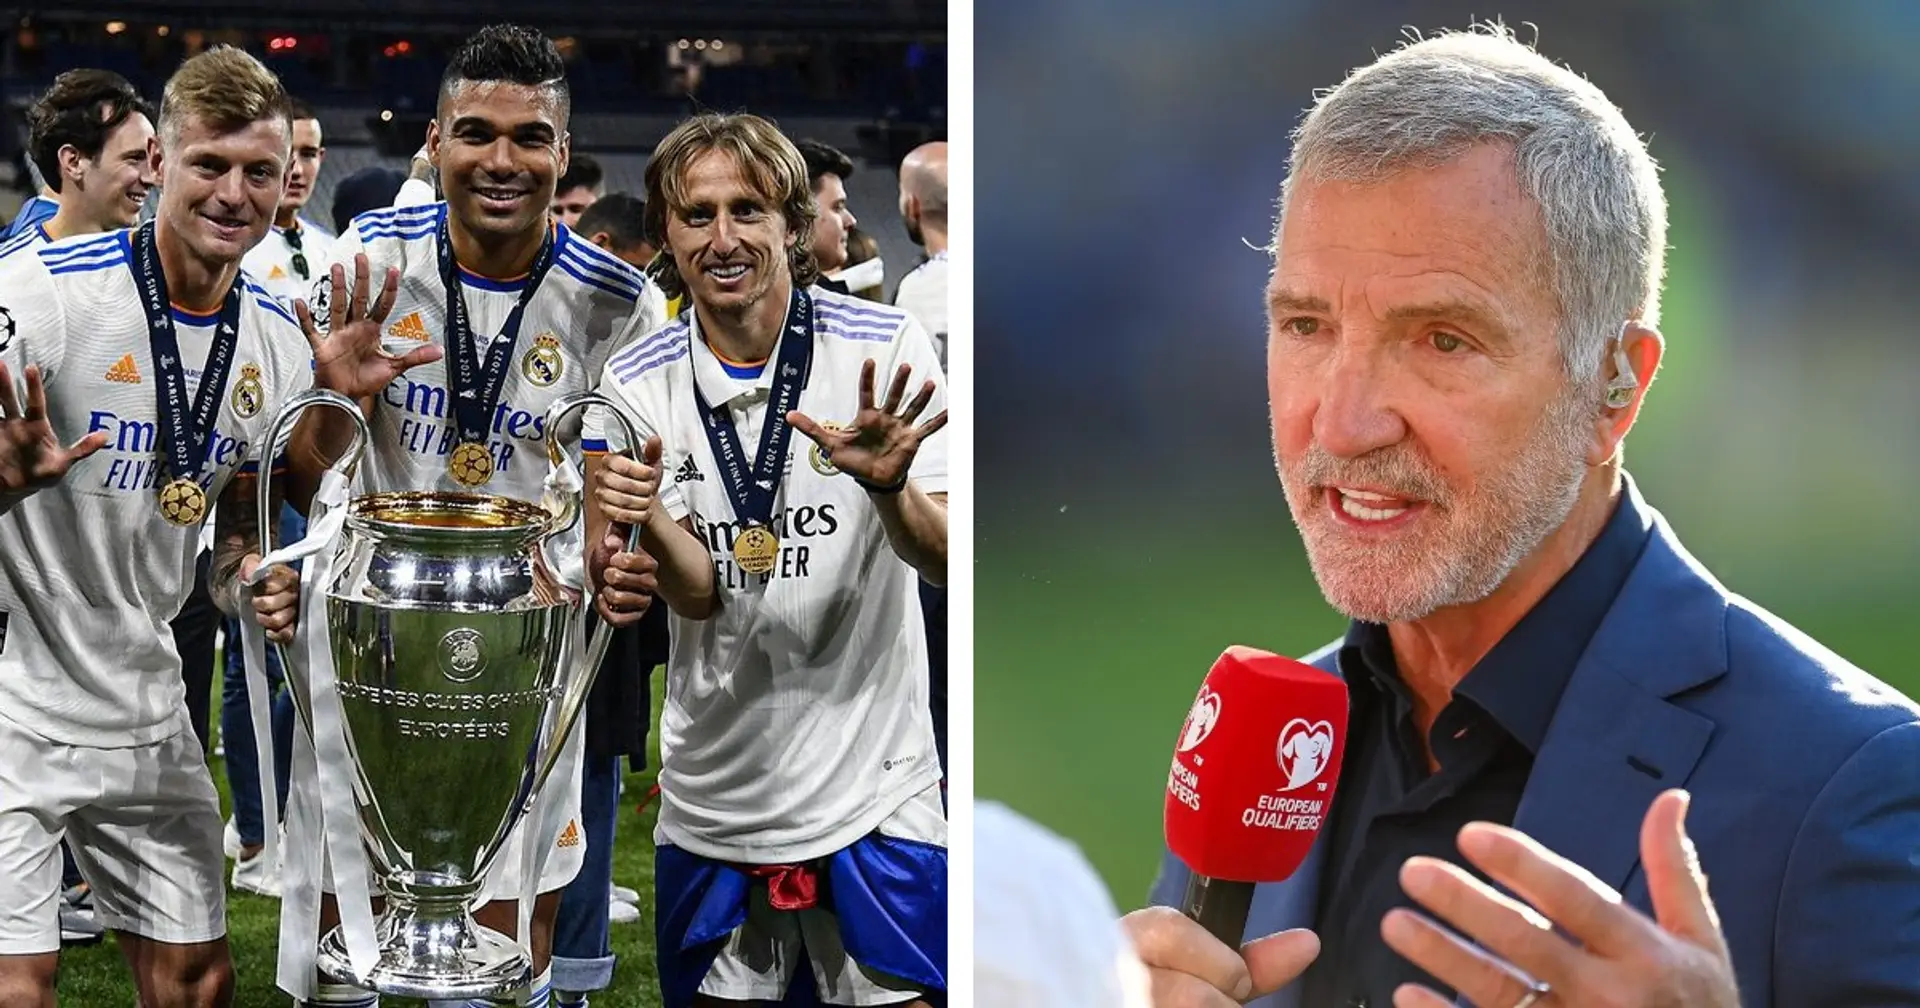 'Casemiro was a bit-player in a special team at Real': Souness says Man United had their 'trousers taken' with two transfers